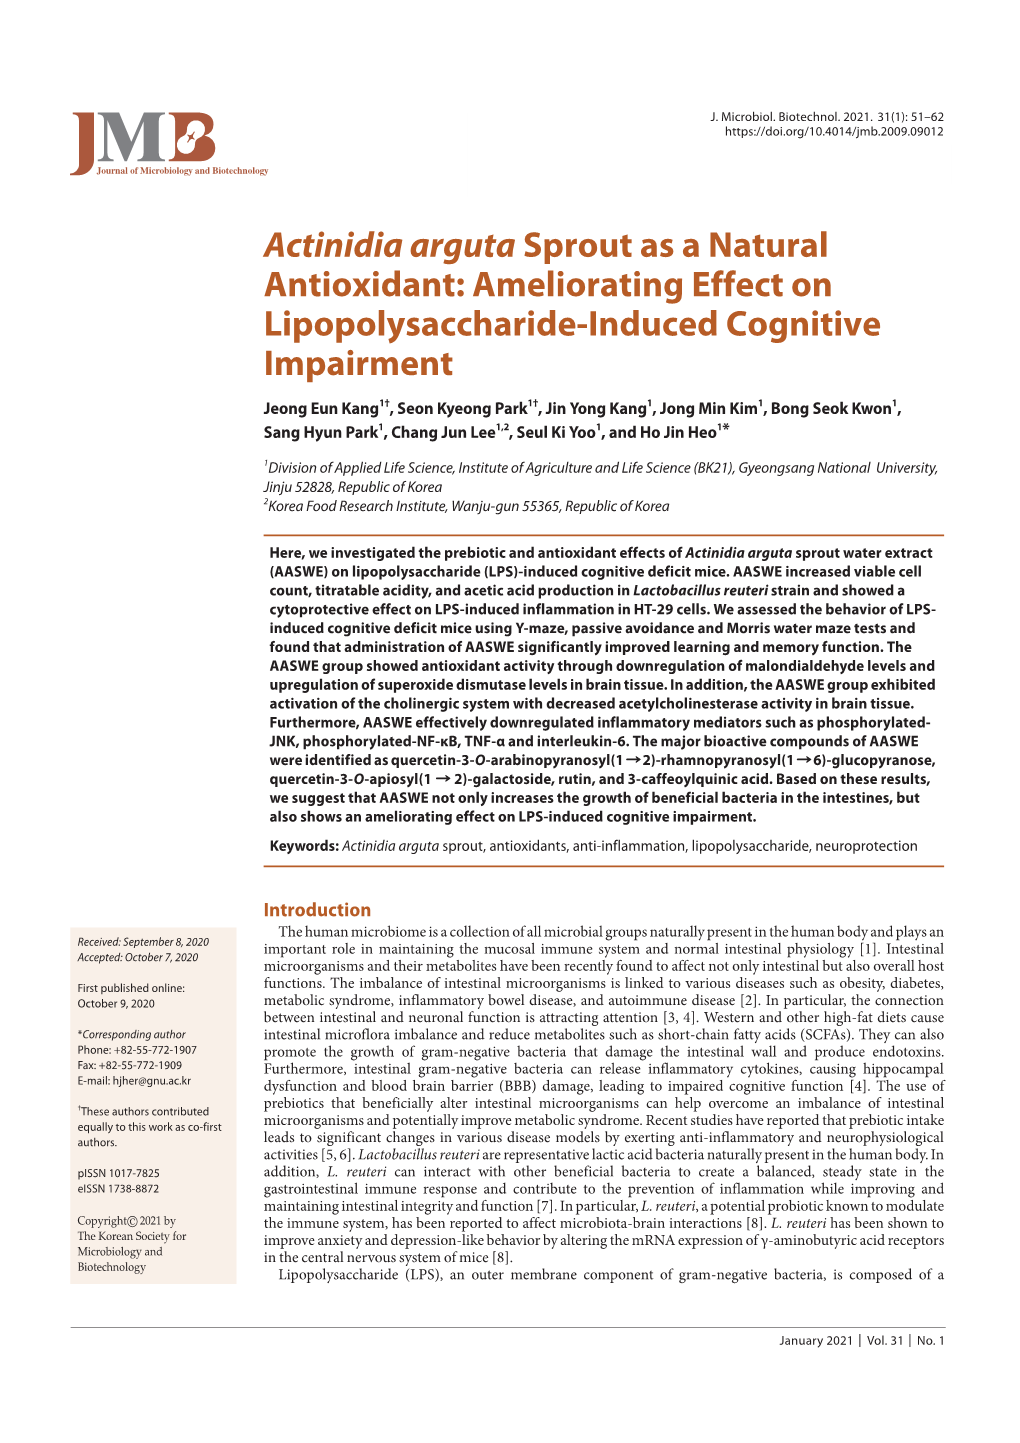 Actinidia Arguta Sprout As a Natural Antioxidant: Ameliorating Effect on Lipopolysaccharide-Induced Cognitive Impairment